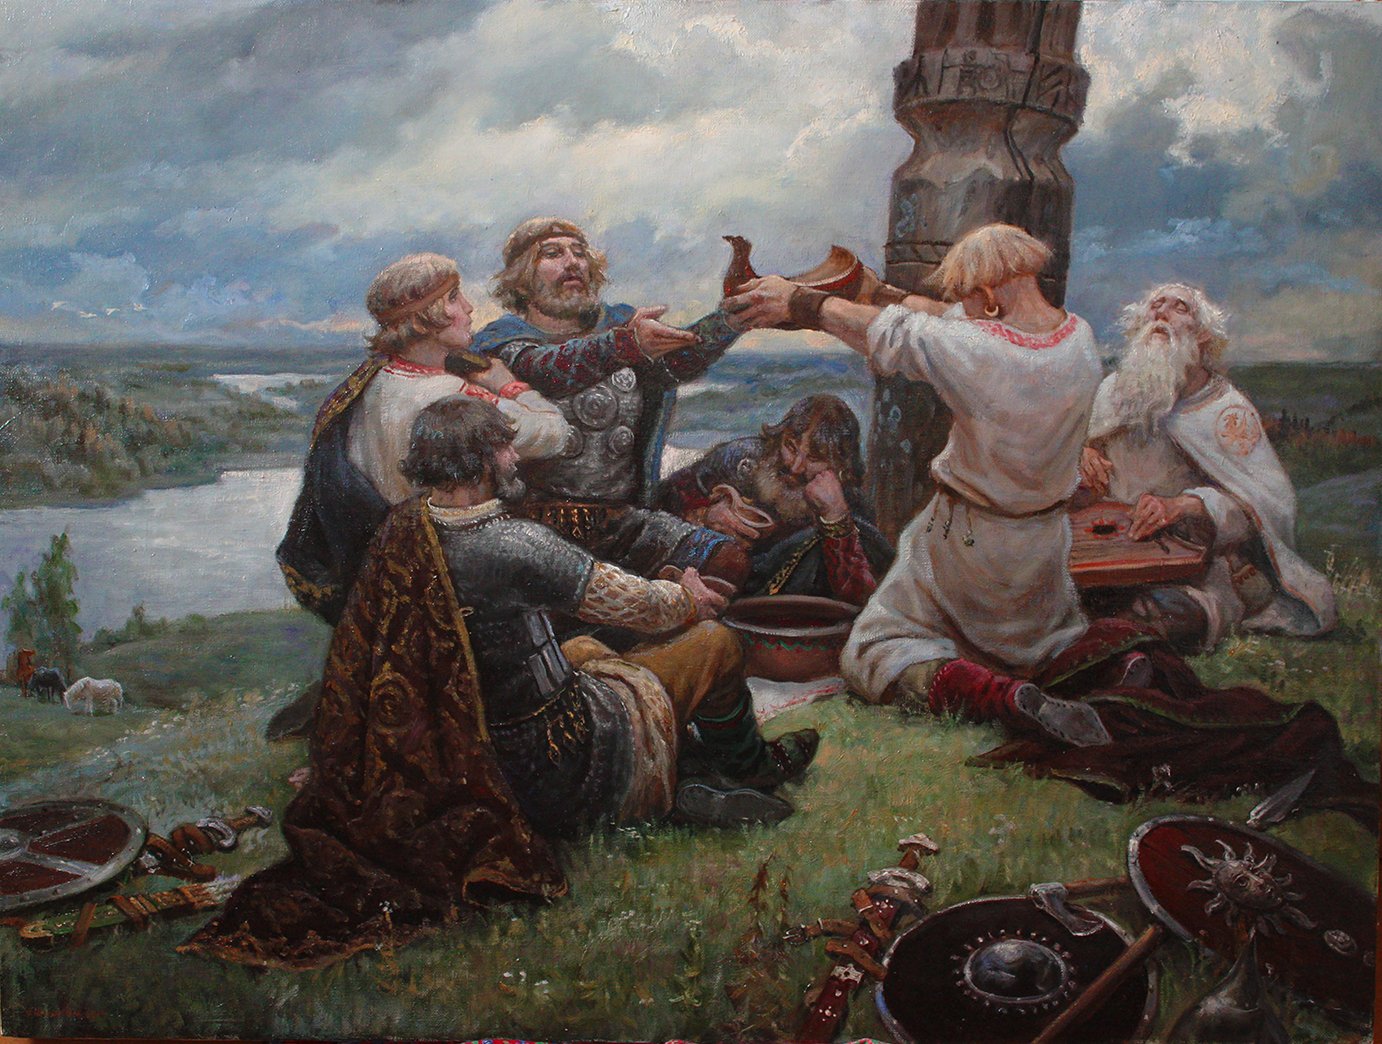 A painting of a group of medieval Slavic men having a funeral feast around a religious idol, on top of a hill overlooking a river.